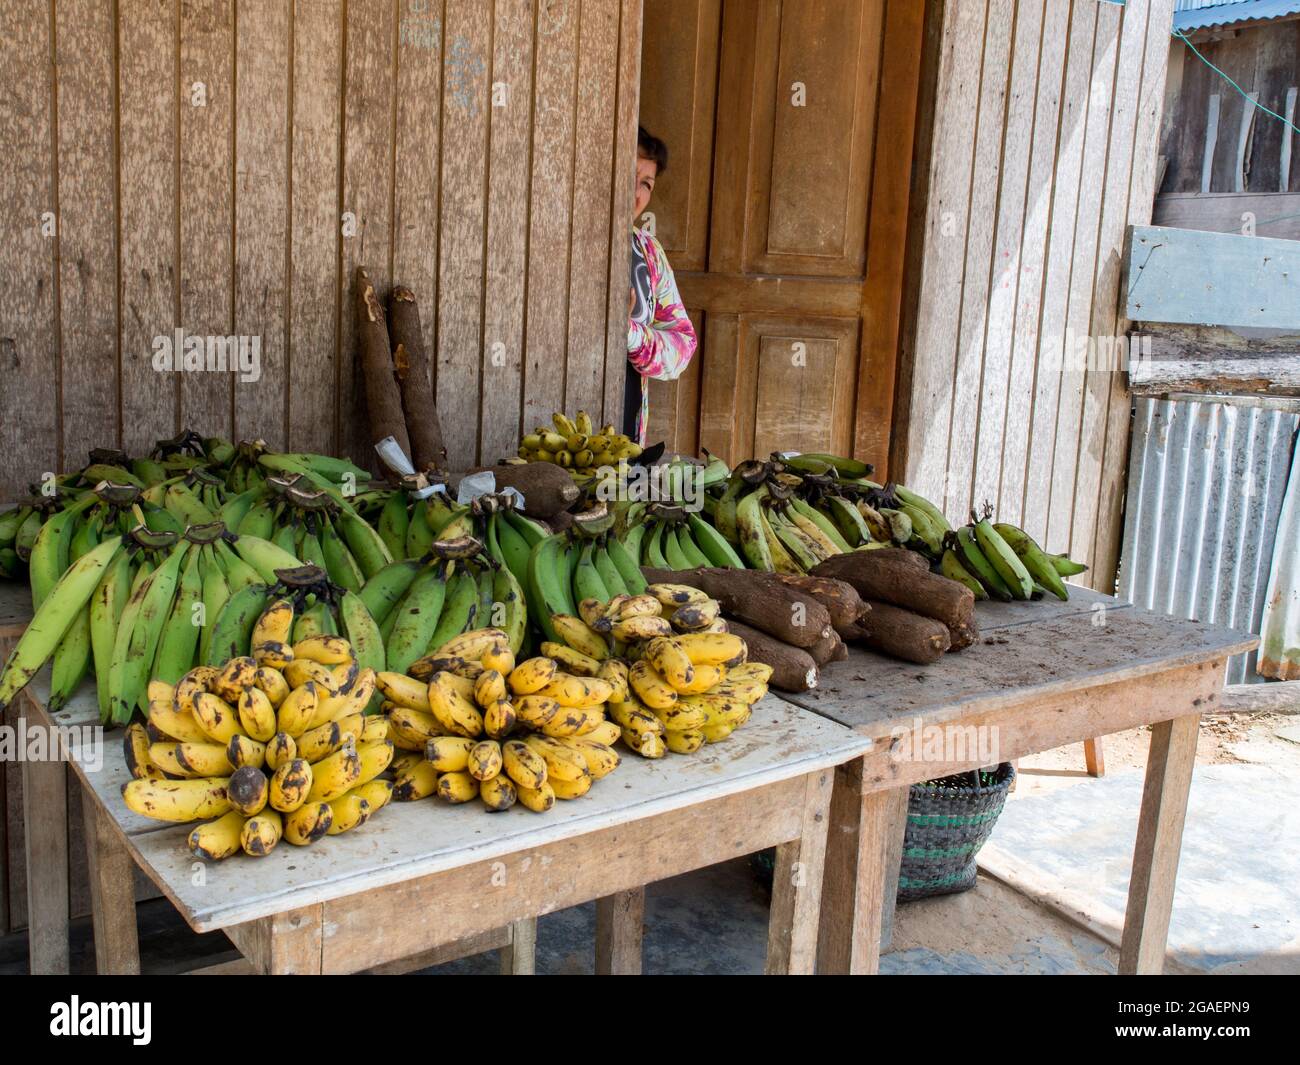 Santo Tomas, Peru - May, 2016: Peruvian woman are selling different kind of bananas and manioc on the table before wooden house in the small village n Stock Photo